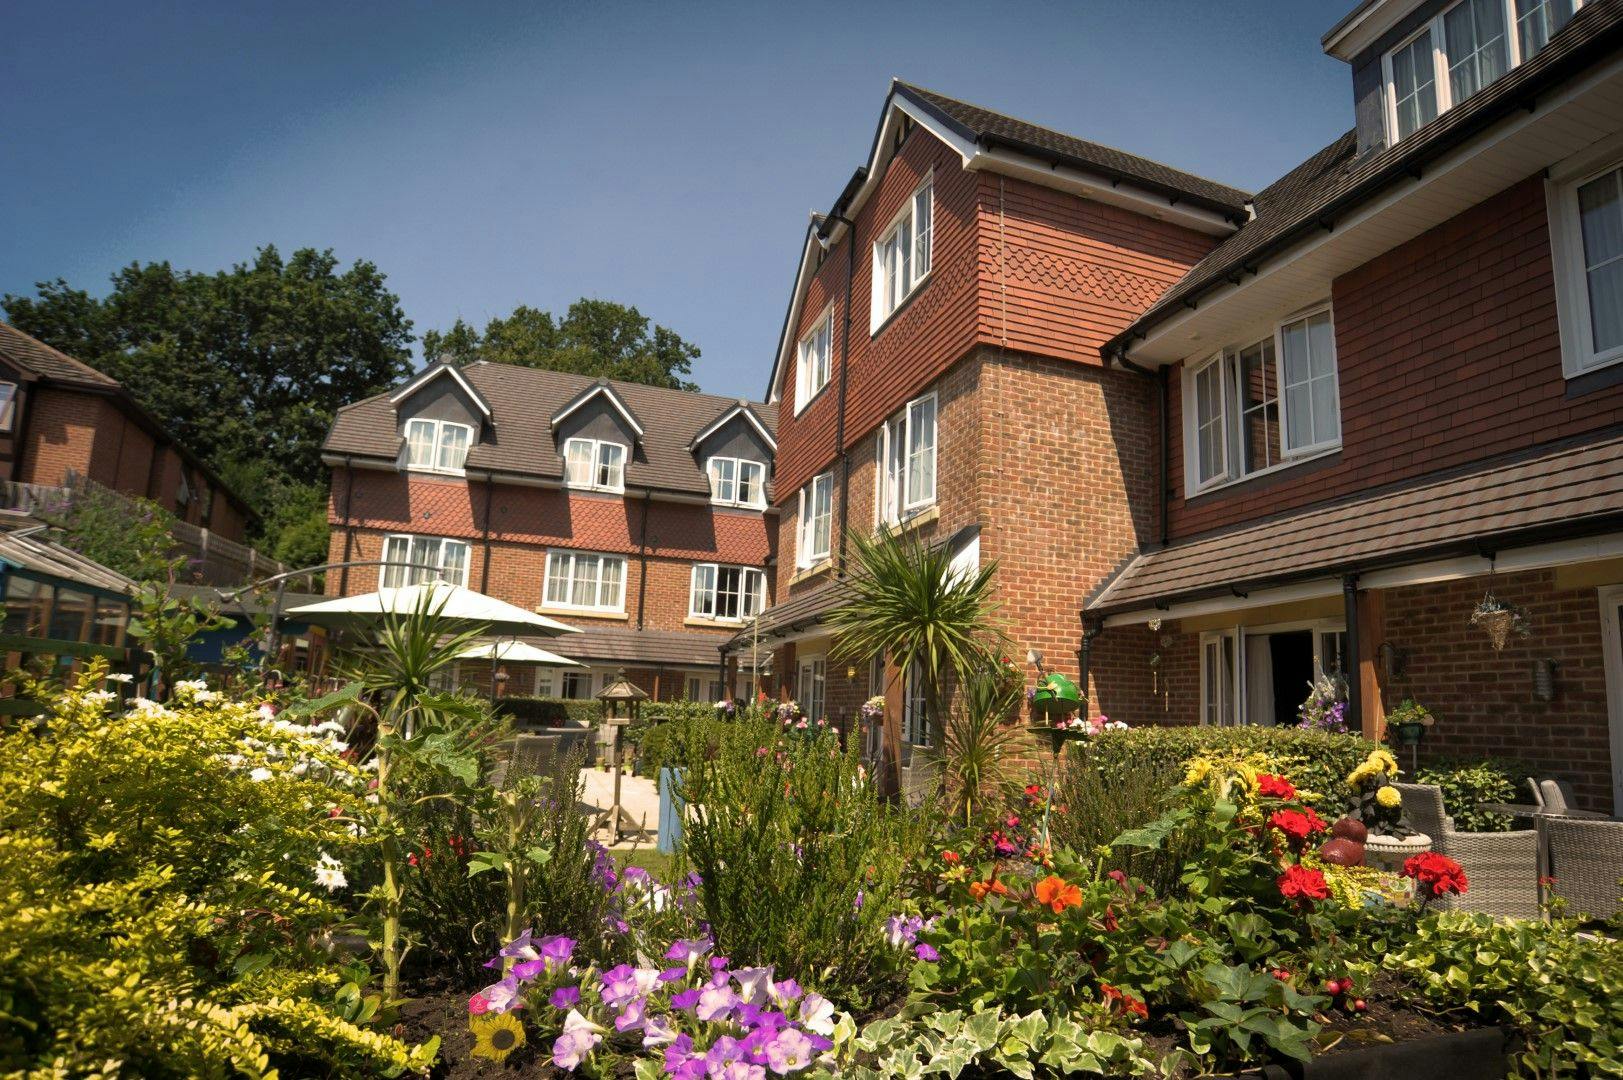 Garden at Lakeview Care Home in Surrey, South East England